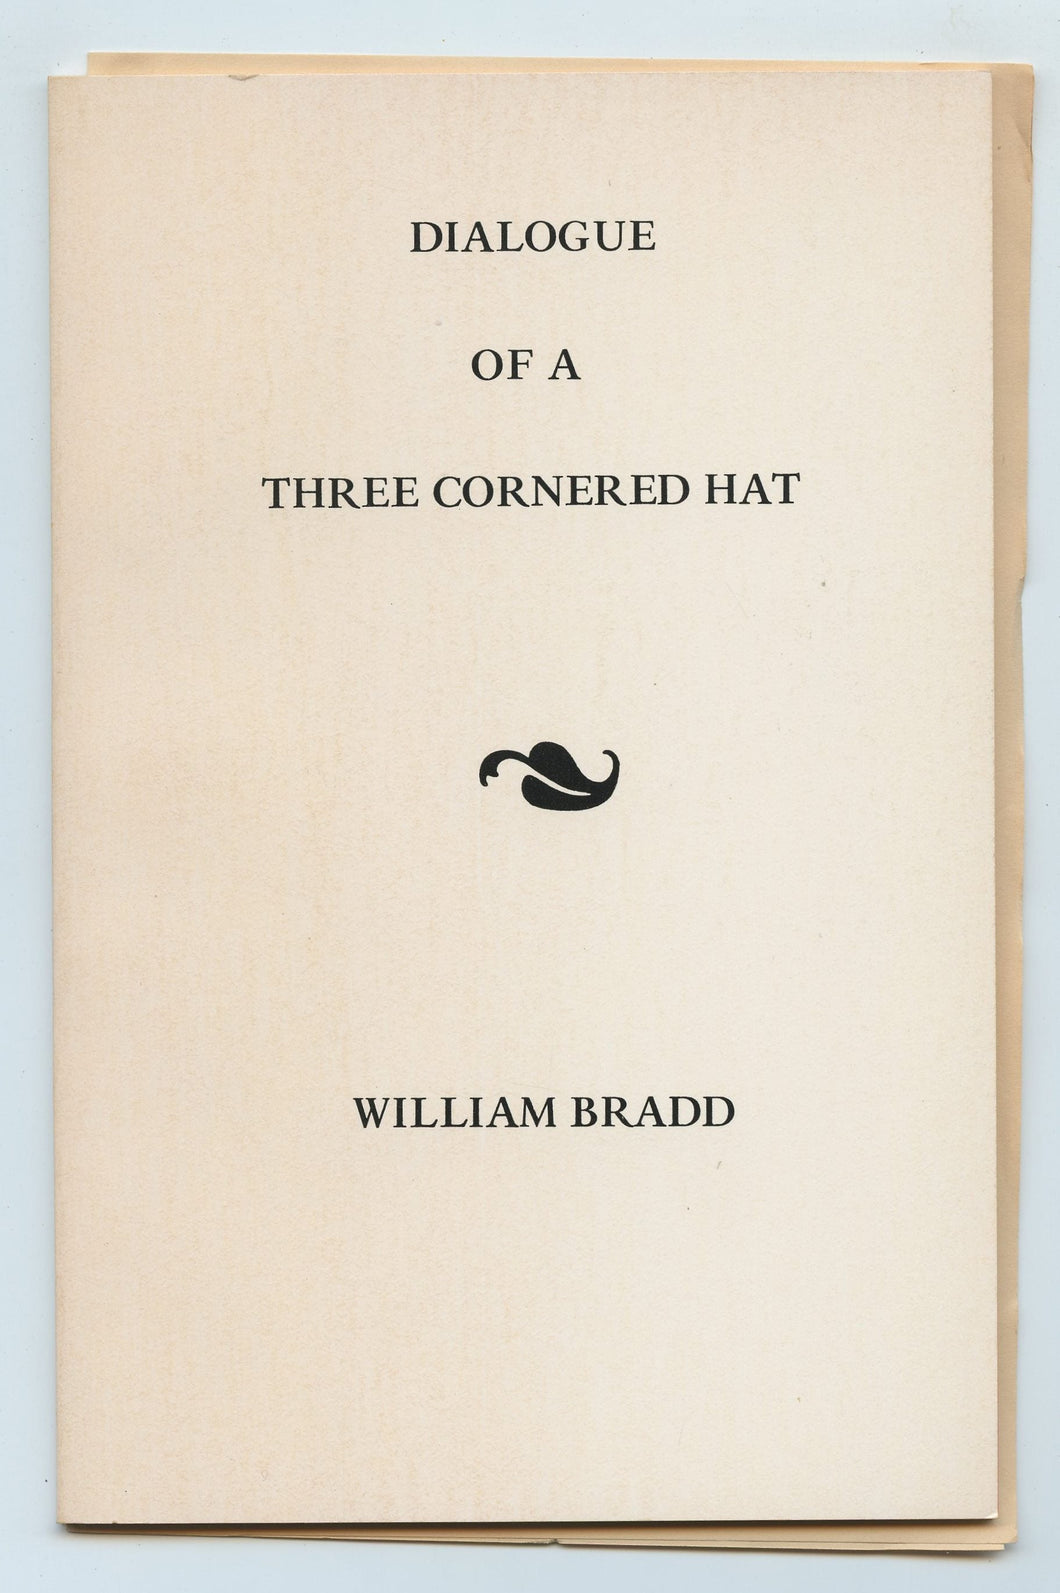 Dialogue of a Three Cornered Hat